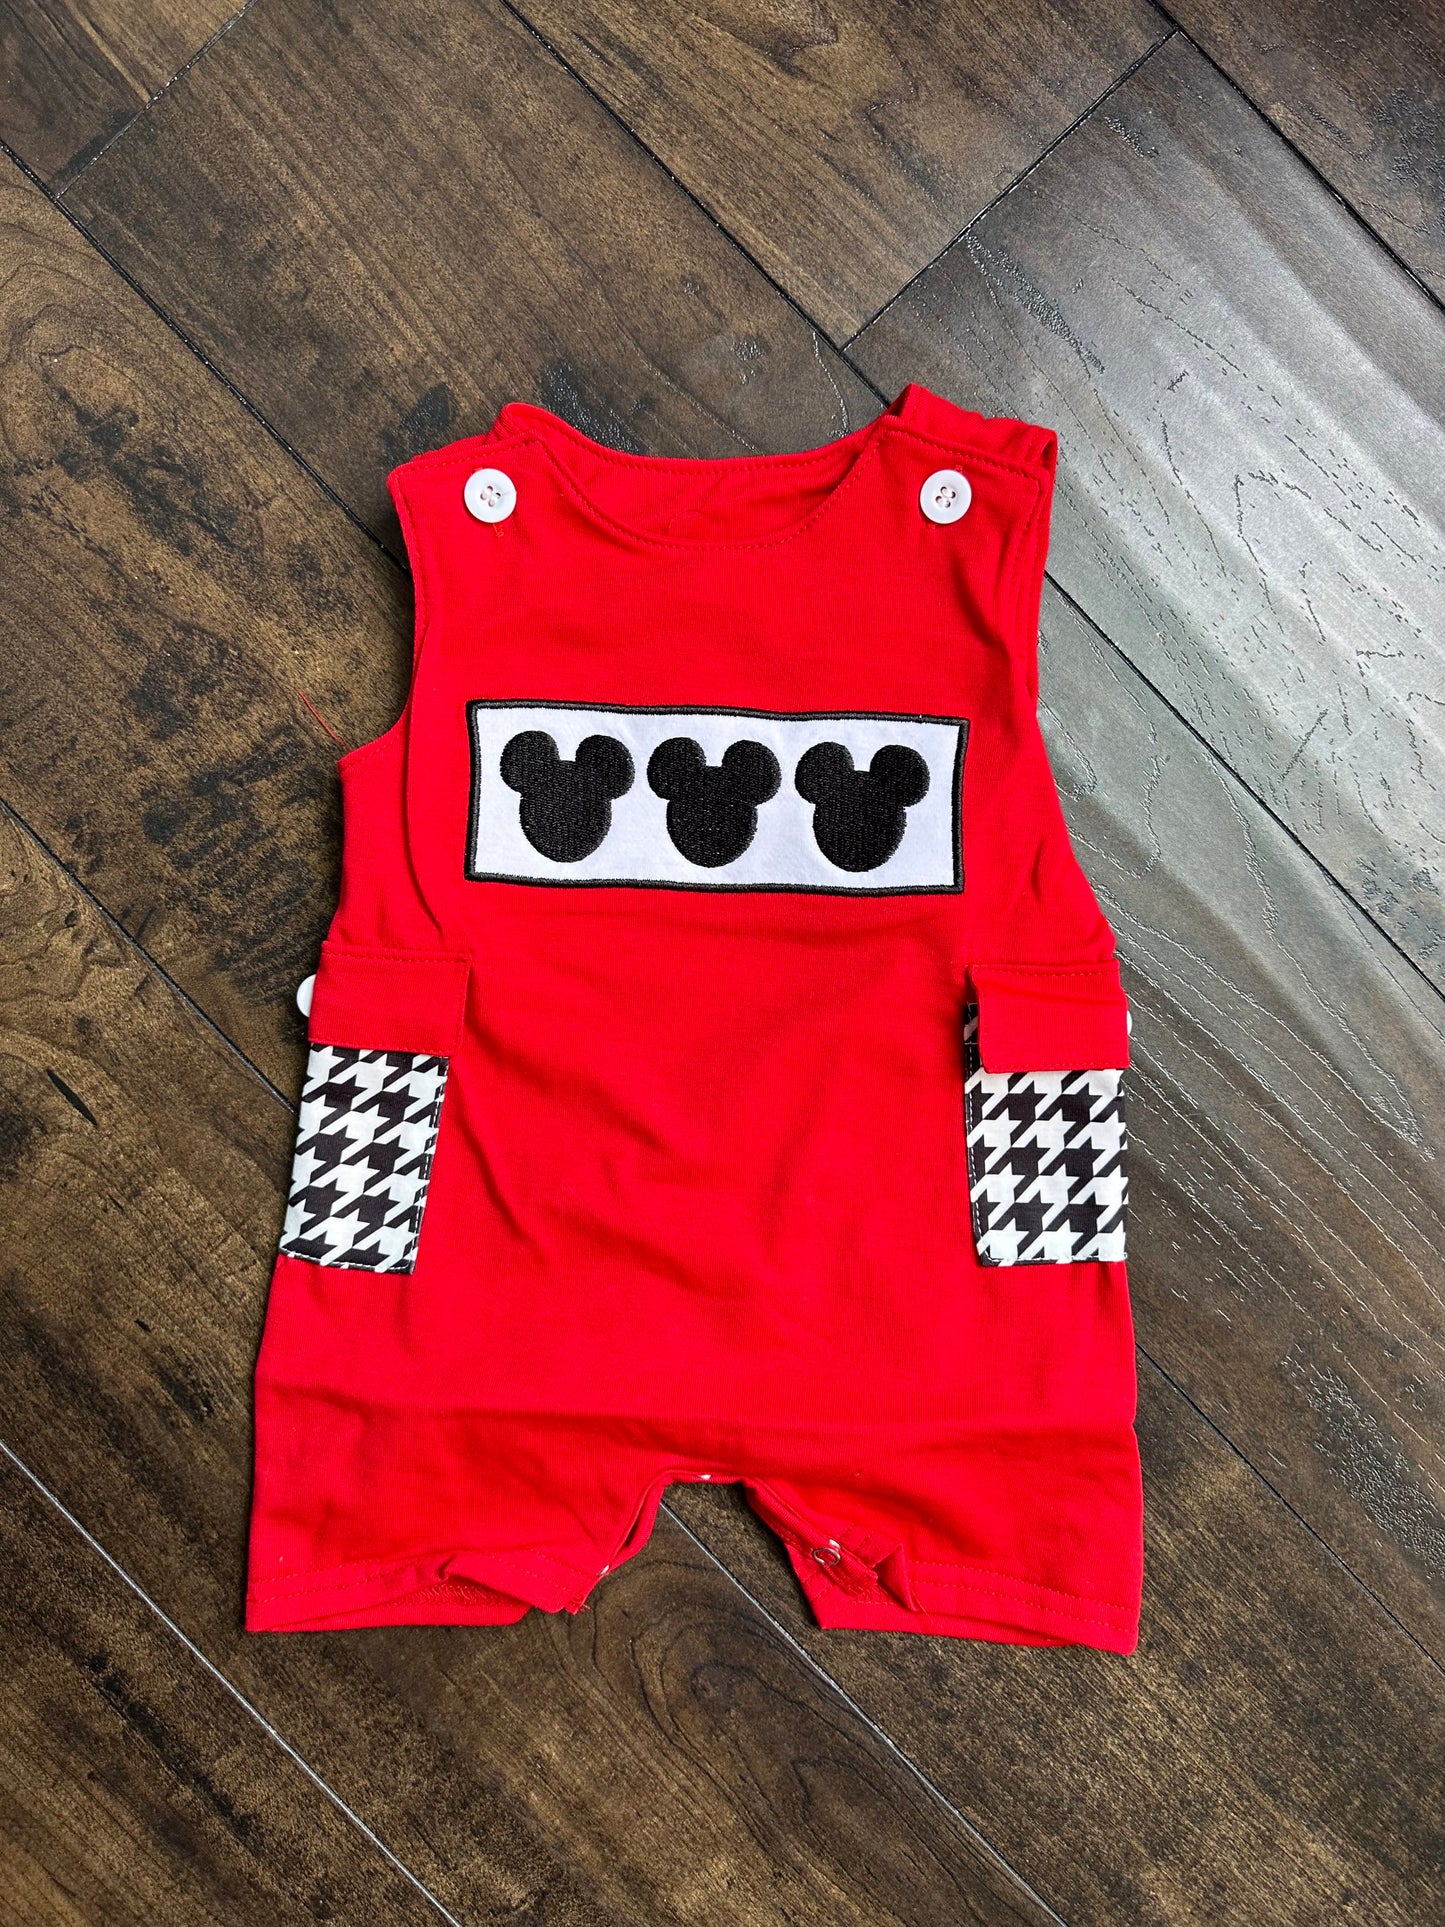 Red Embroidered Mickey Mouse JonJon